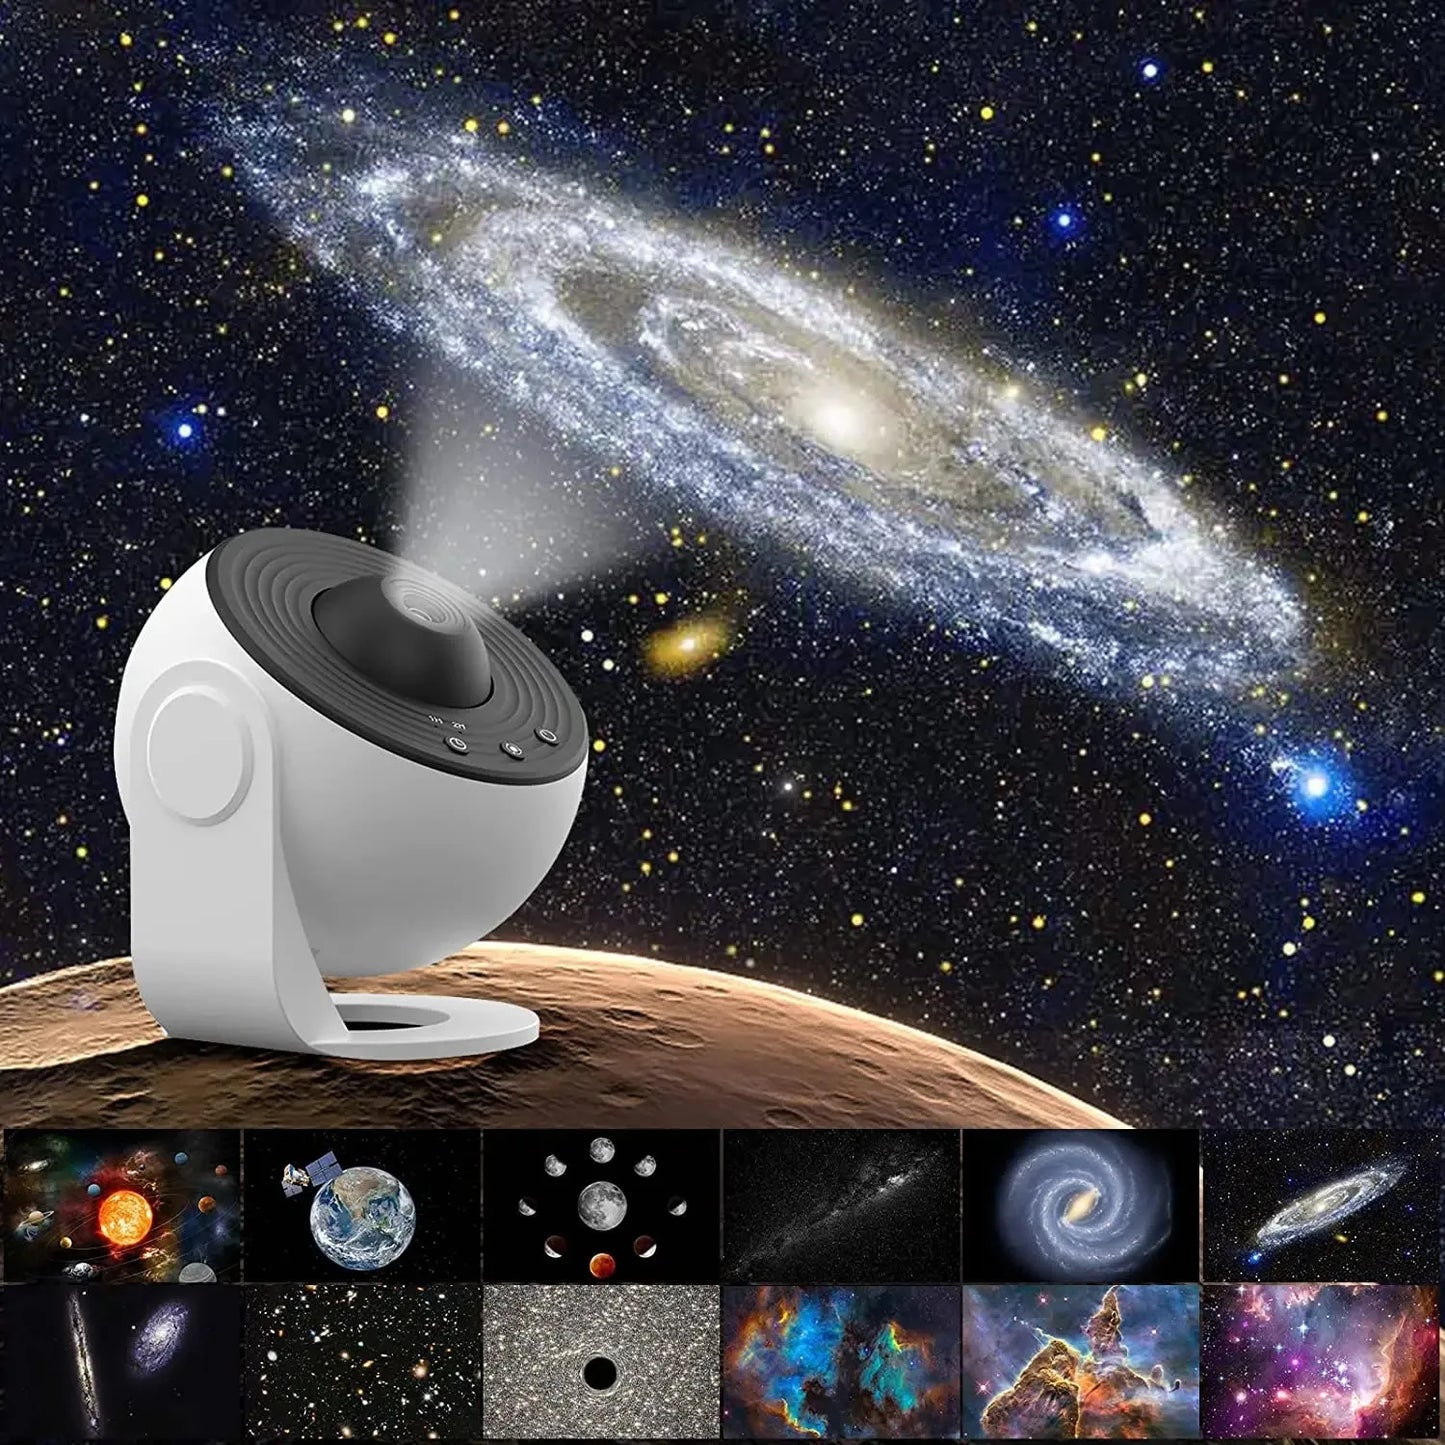 13 in 1 Star Projector, Night Light Galaxy Projector Starry Sky Projector 360° Rotate Planetarium Lamp For Kids Bedroom Deco ﻿